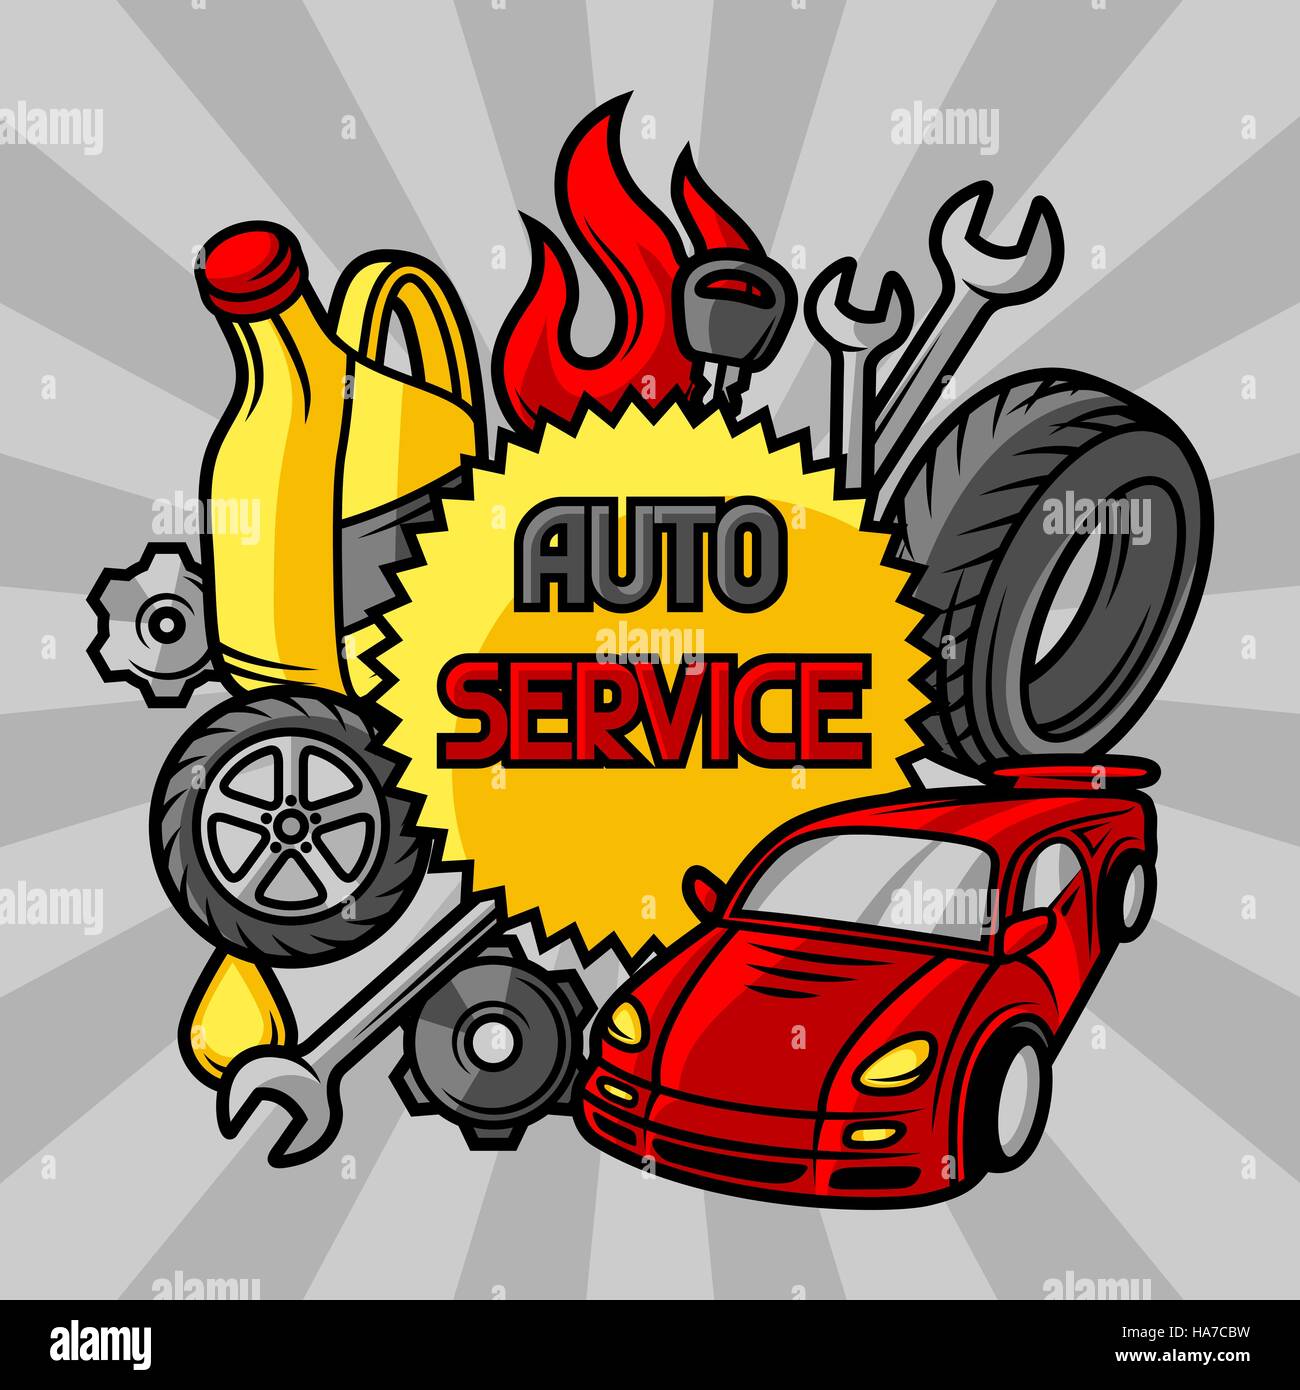 Auto Repair Fire Shop High Resolution Stock Photography And Images Alamy